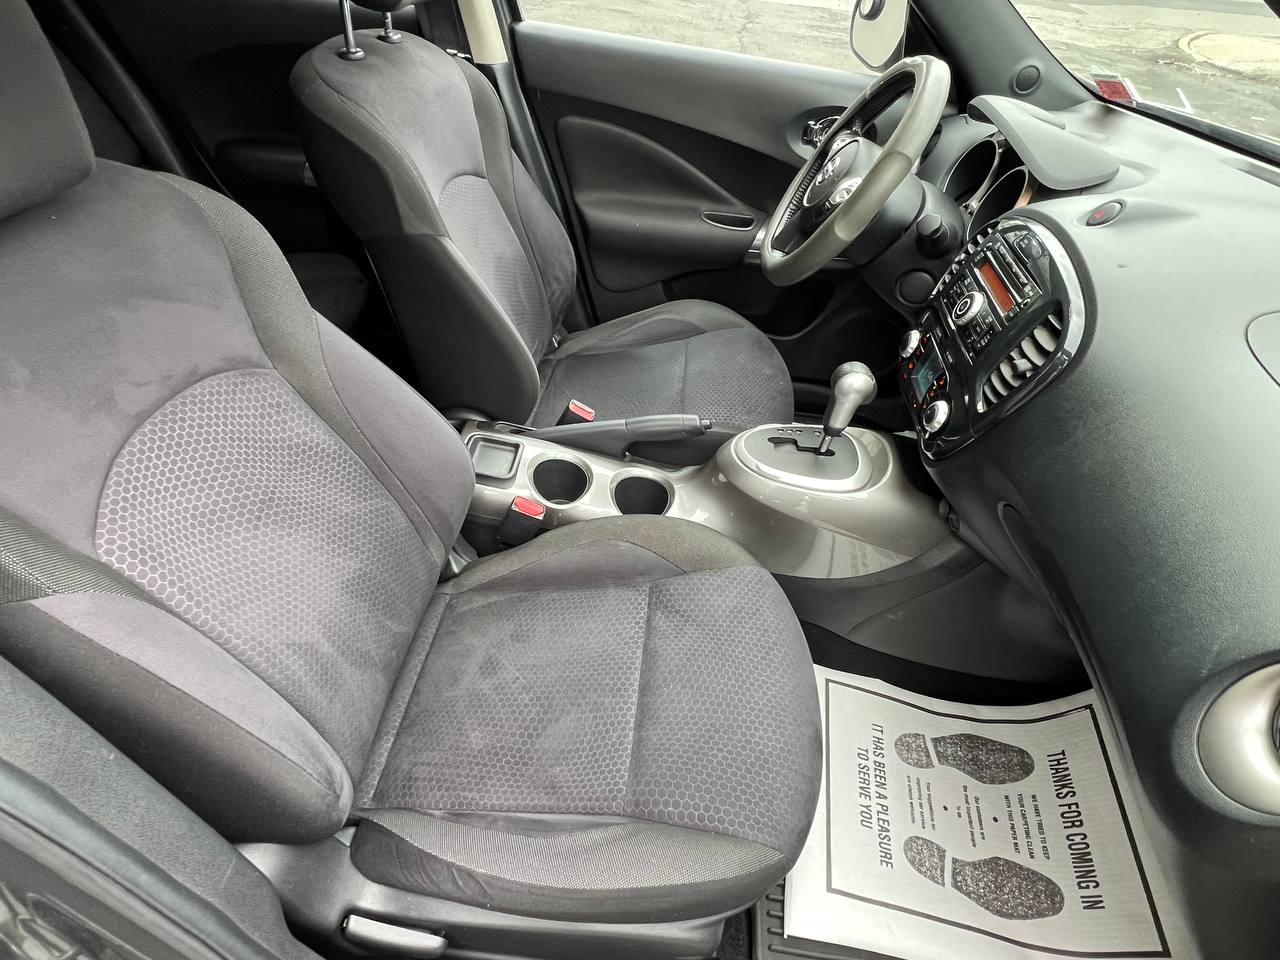 Used - Nissan Juke SV AWD Wagon for sale in Staten Island NY